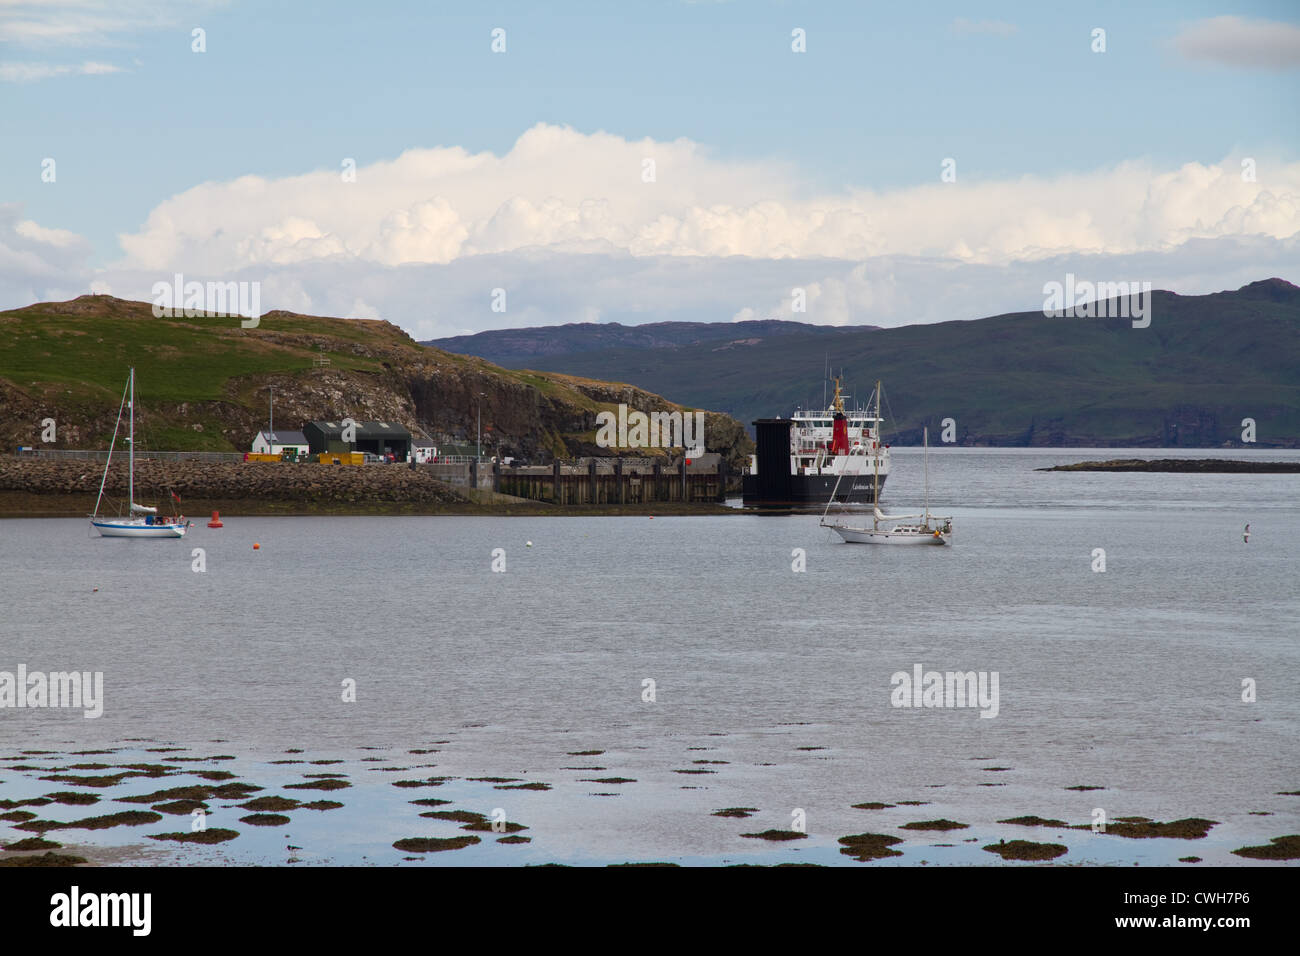 The CalMac ferry arrives at the pier on Isle of Canna, Small Isles, Scotland Stock Photo